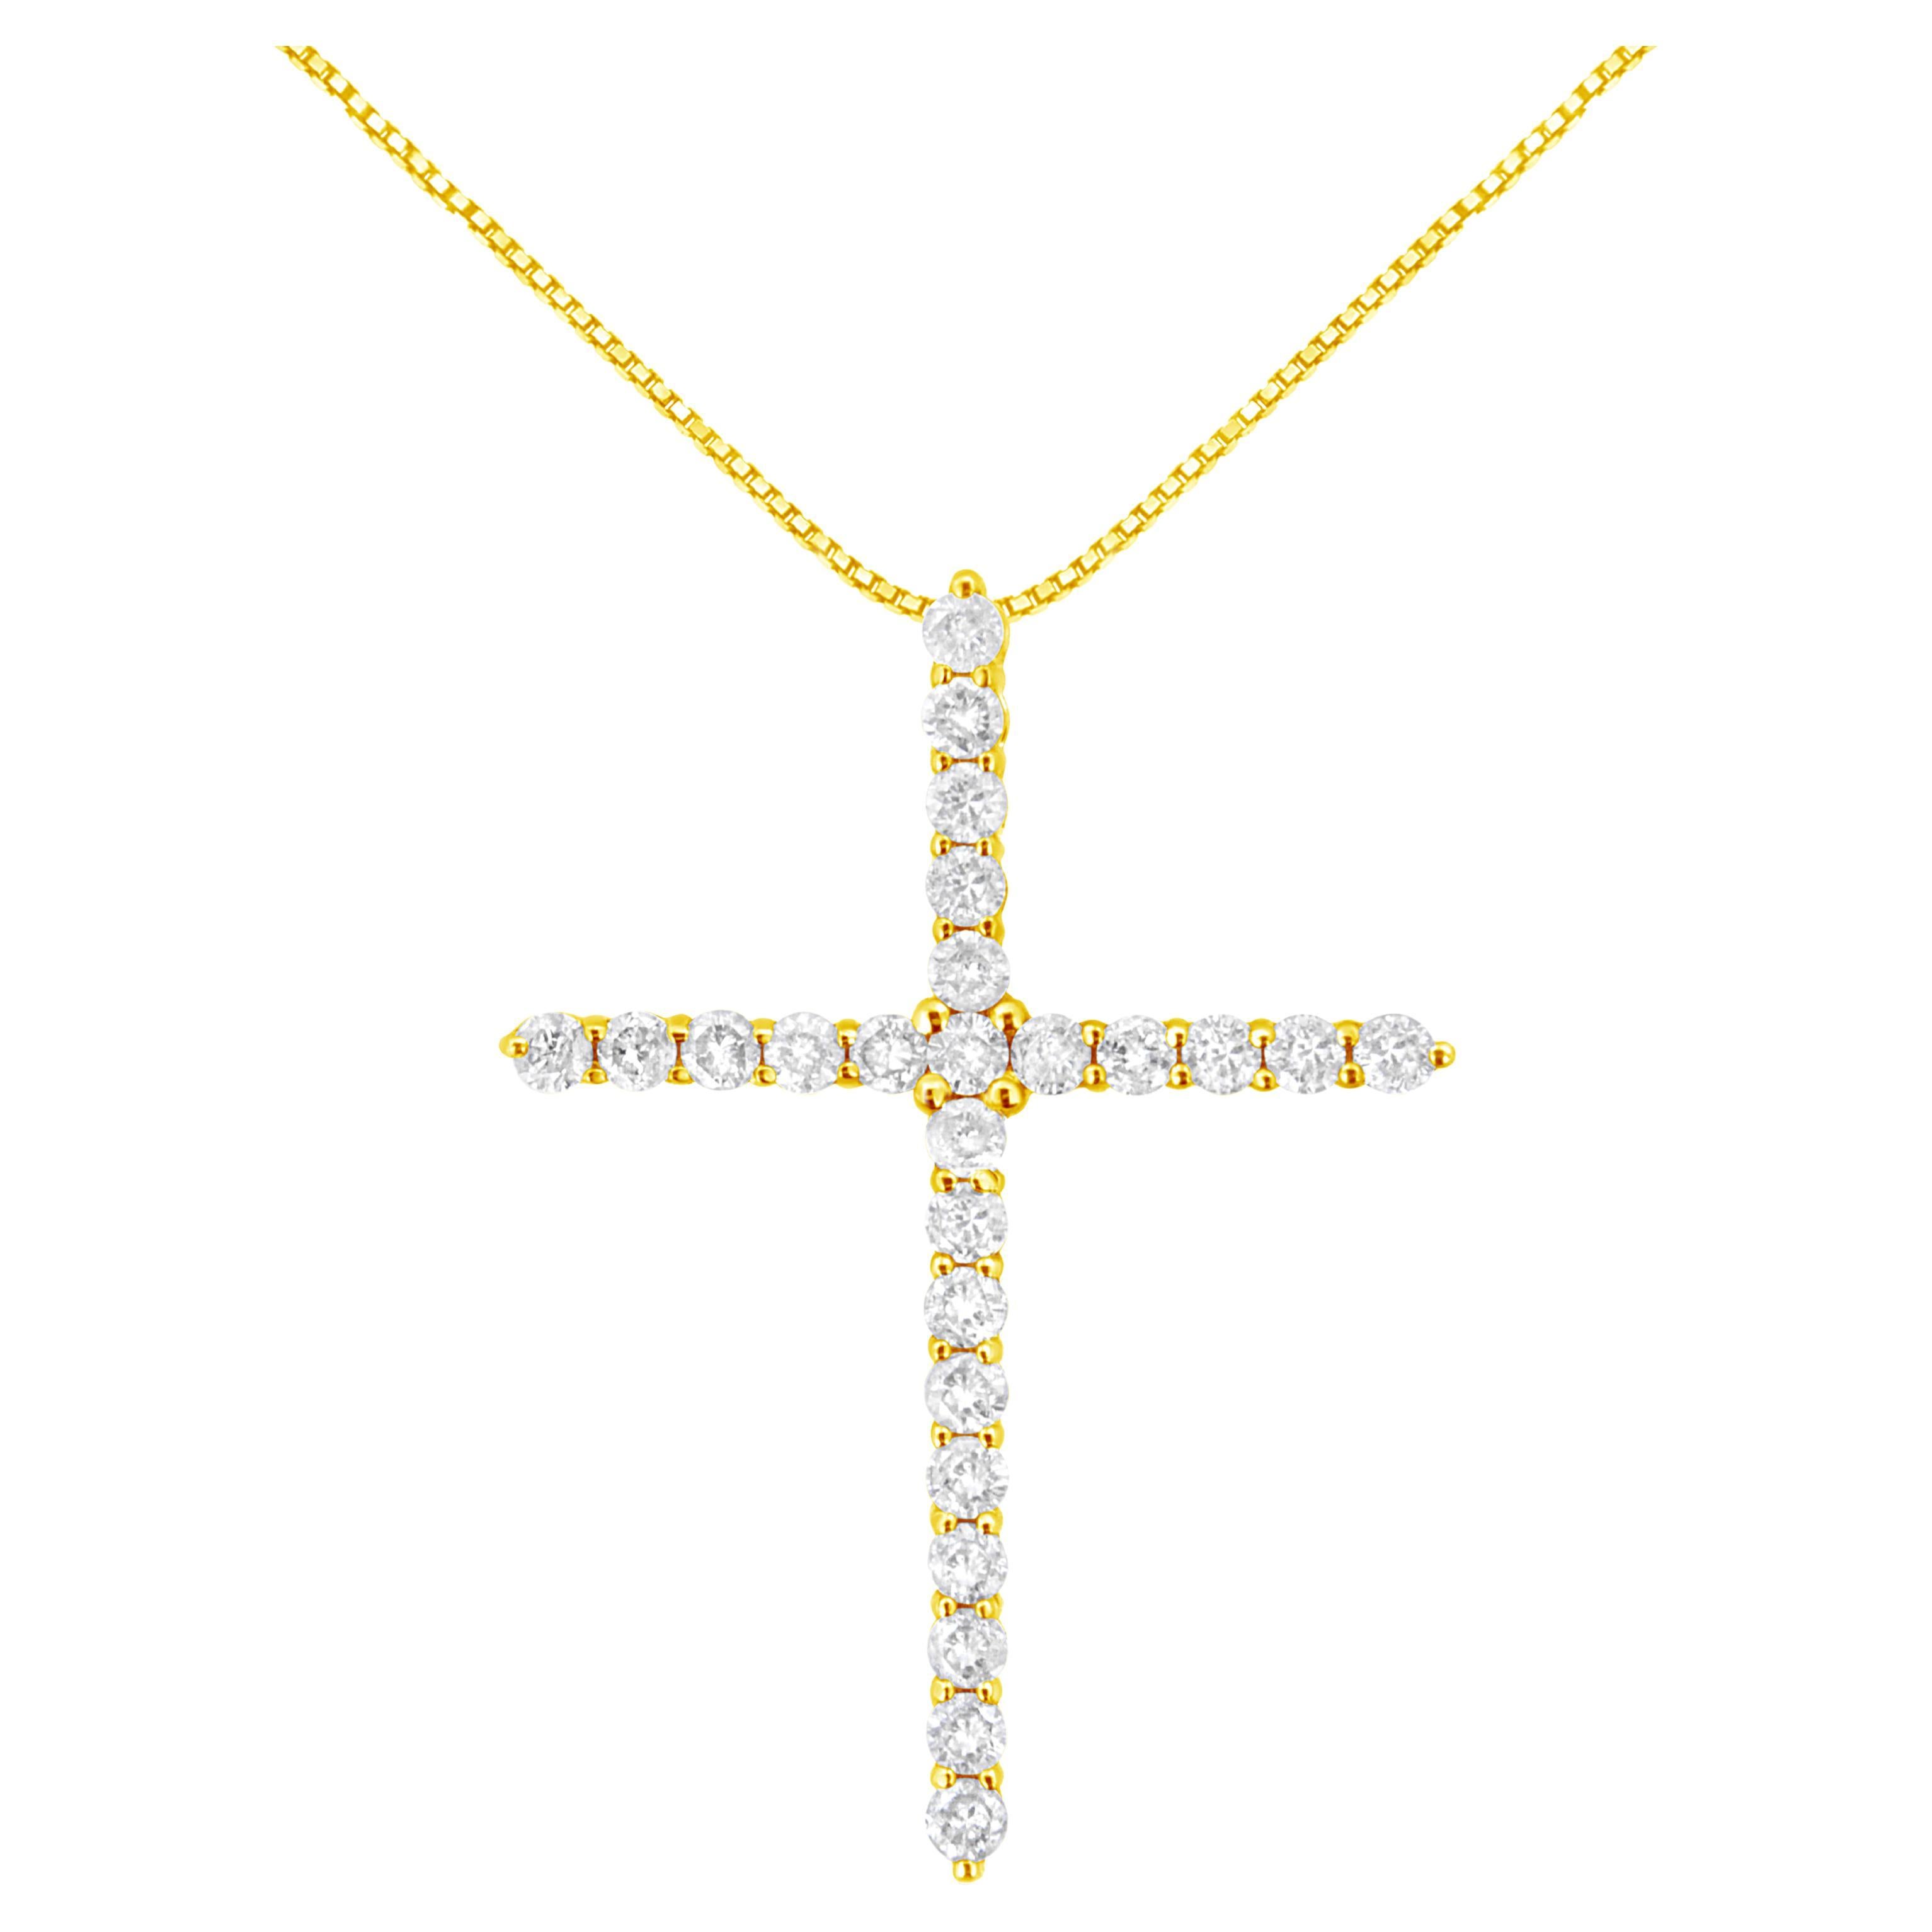 Yellow Gold Plated Sterling Silver 2.0 Carat Diamond Cross Pendant Necklace For Sale